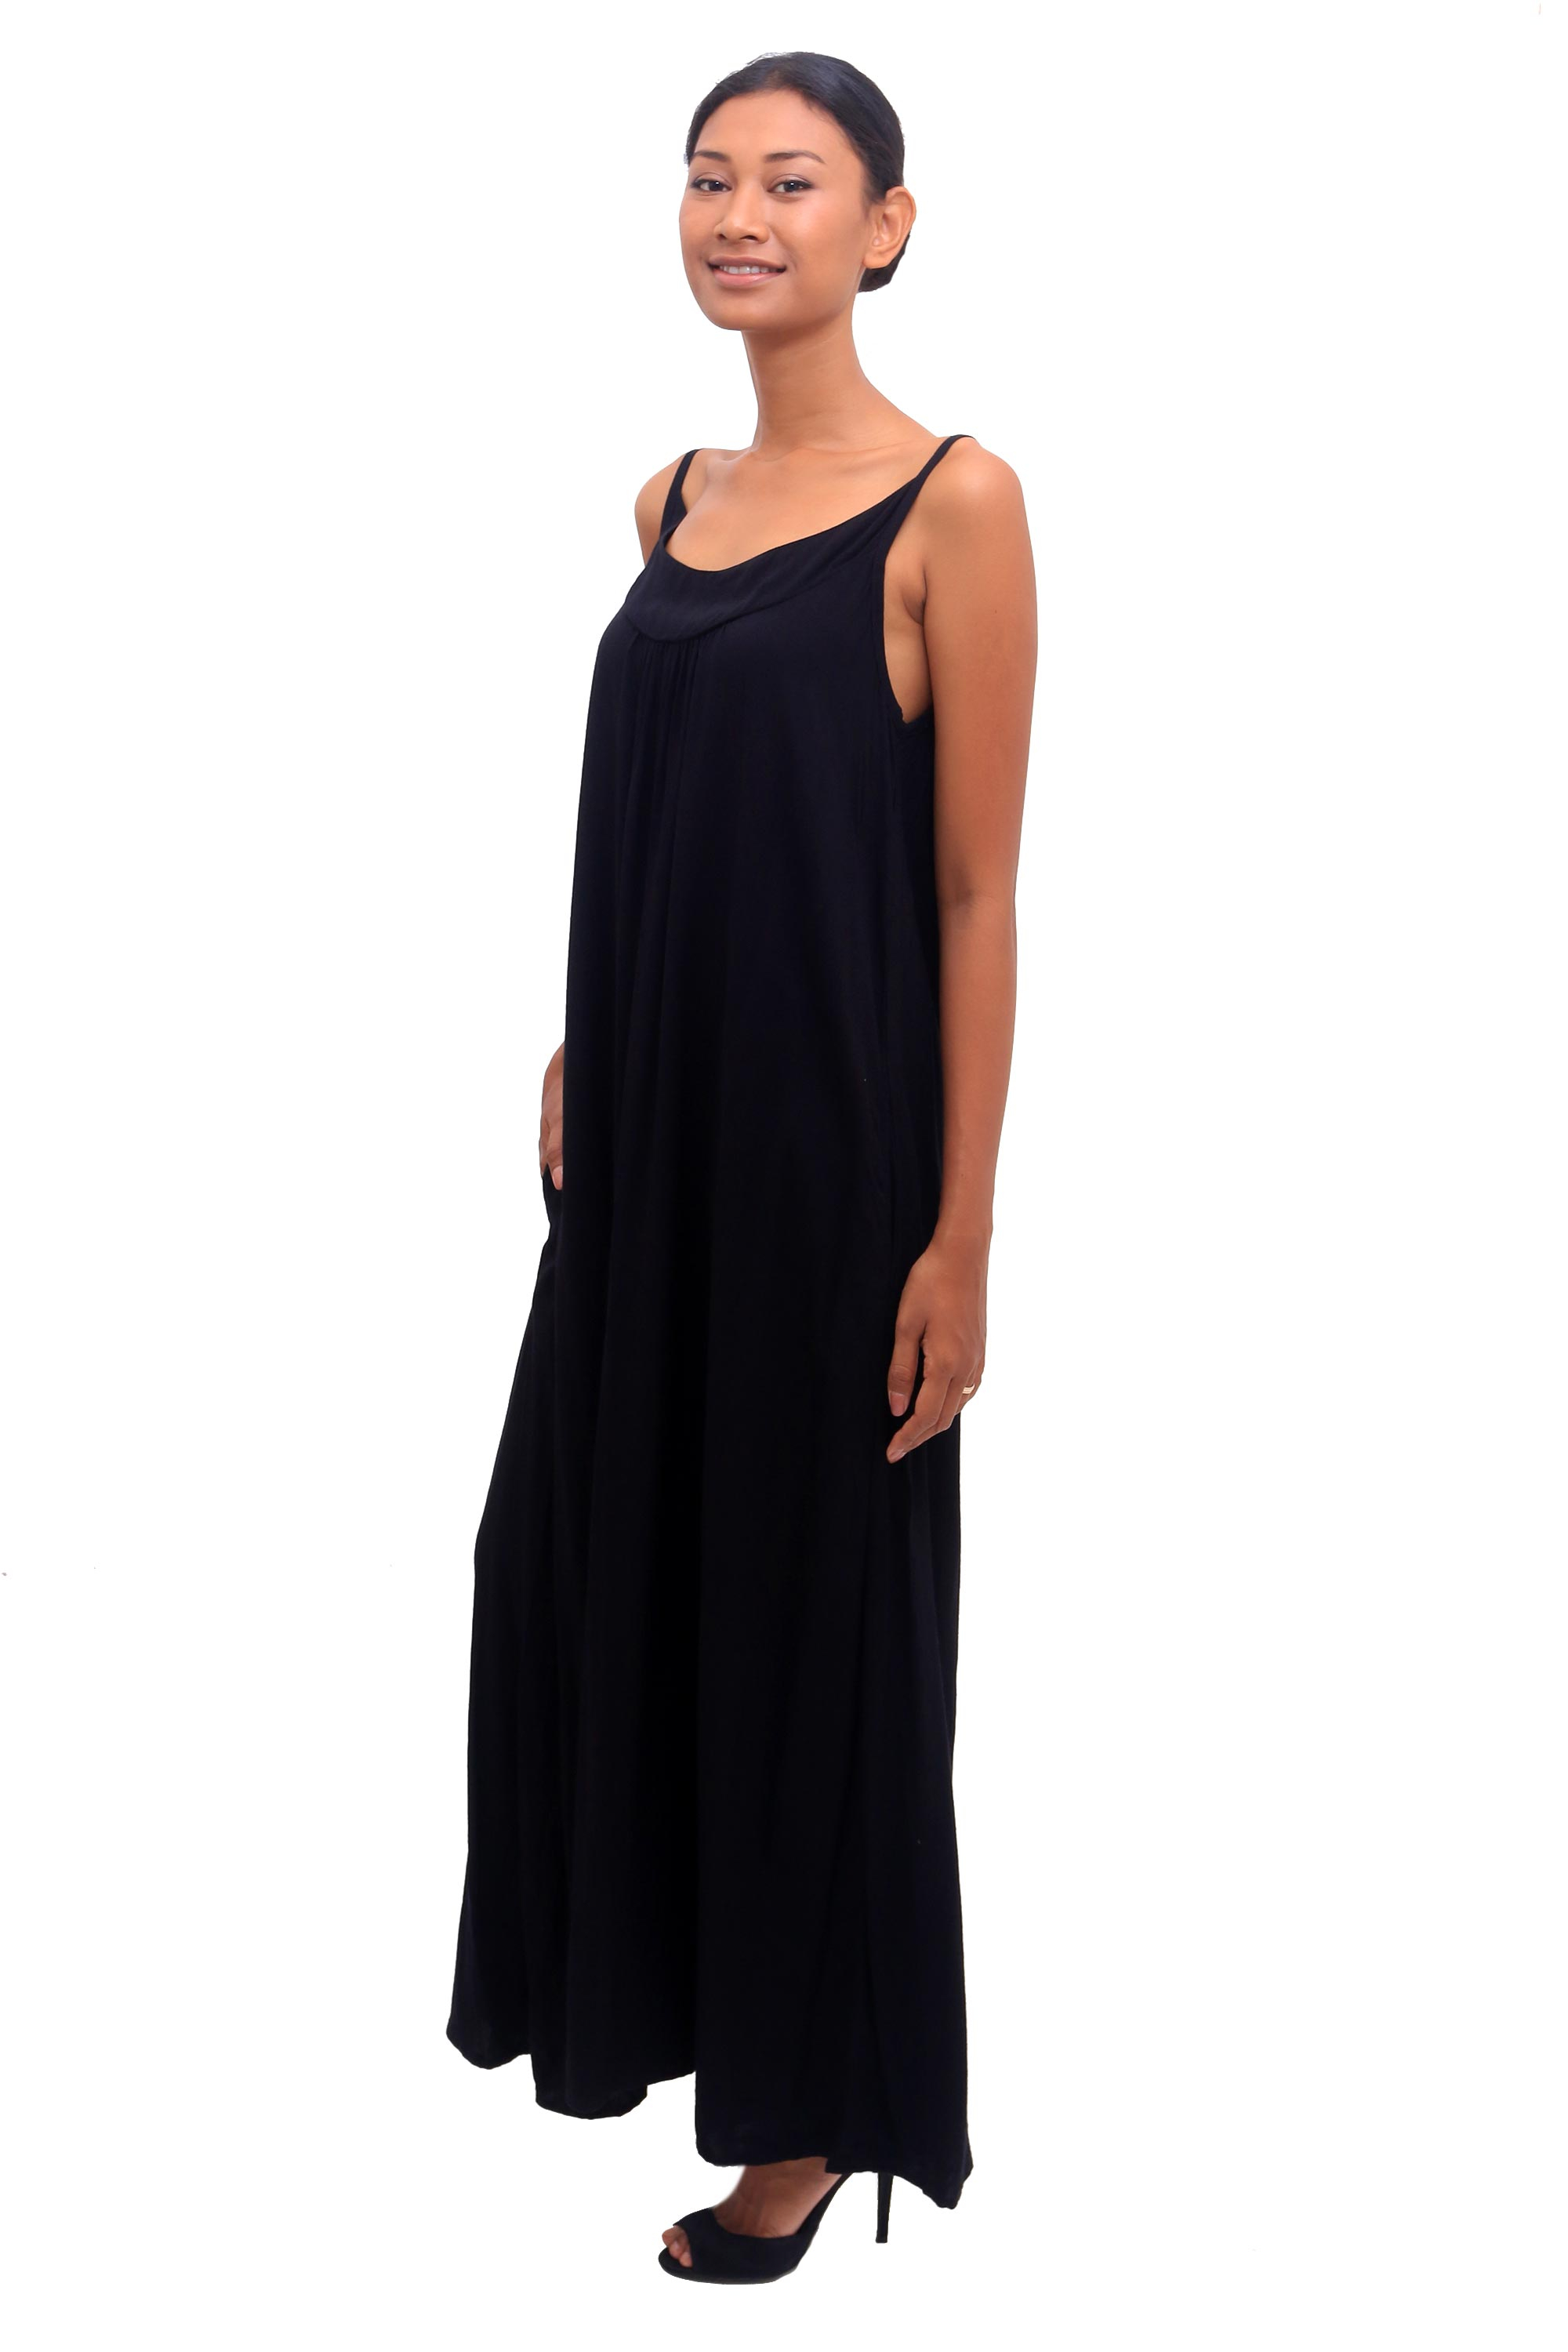 Rayon Maxi Sundress in Solid Black from Bali - Black Intrigue | NOVICA